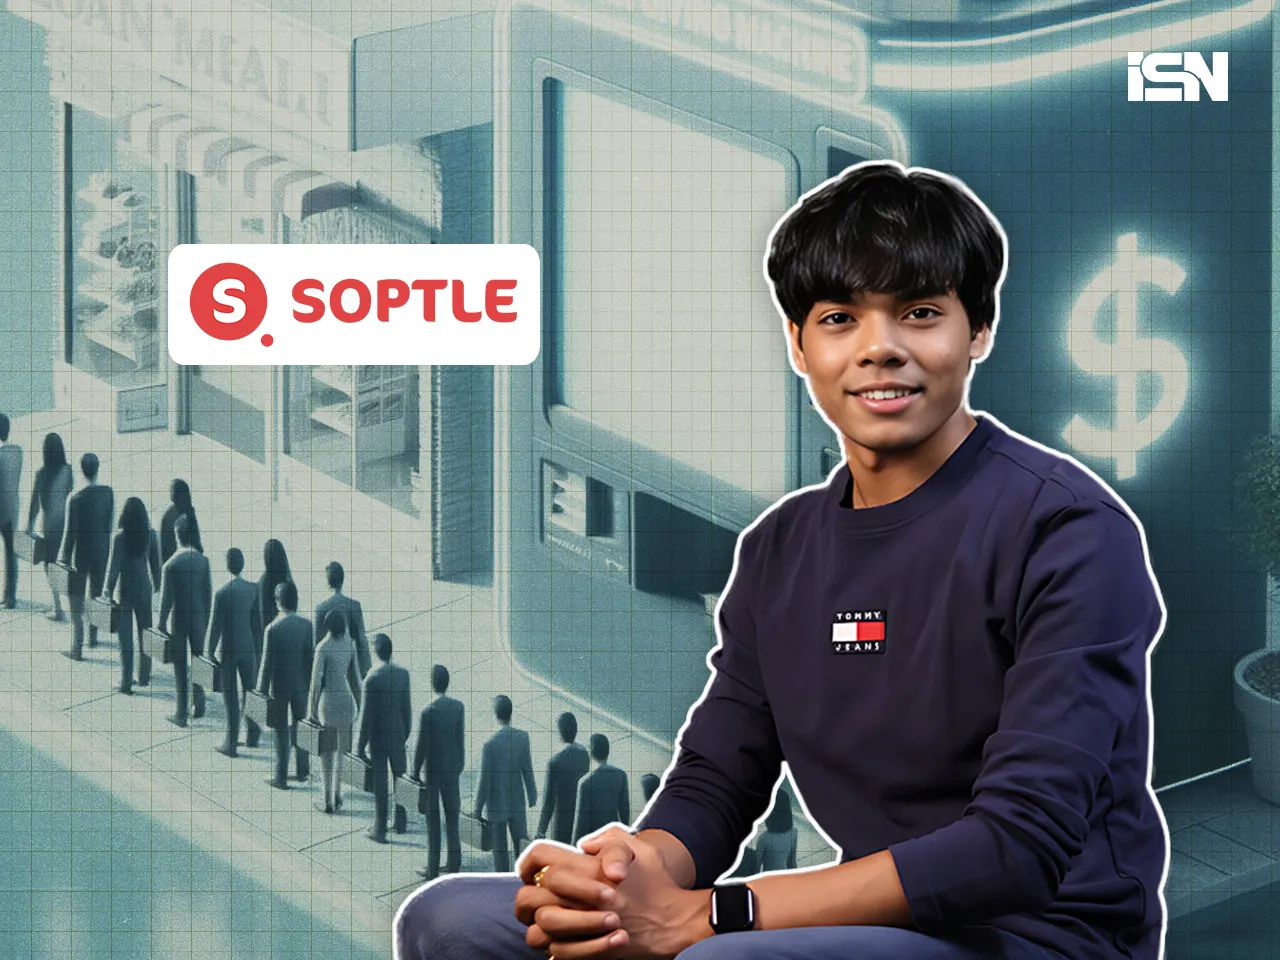 How Soptle is revolutionising the way credit is extended to small businesses